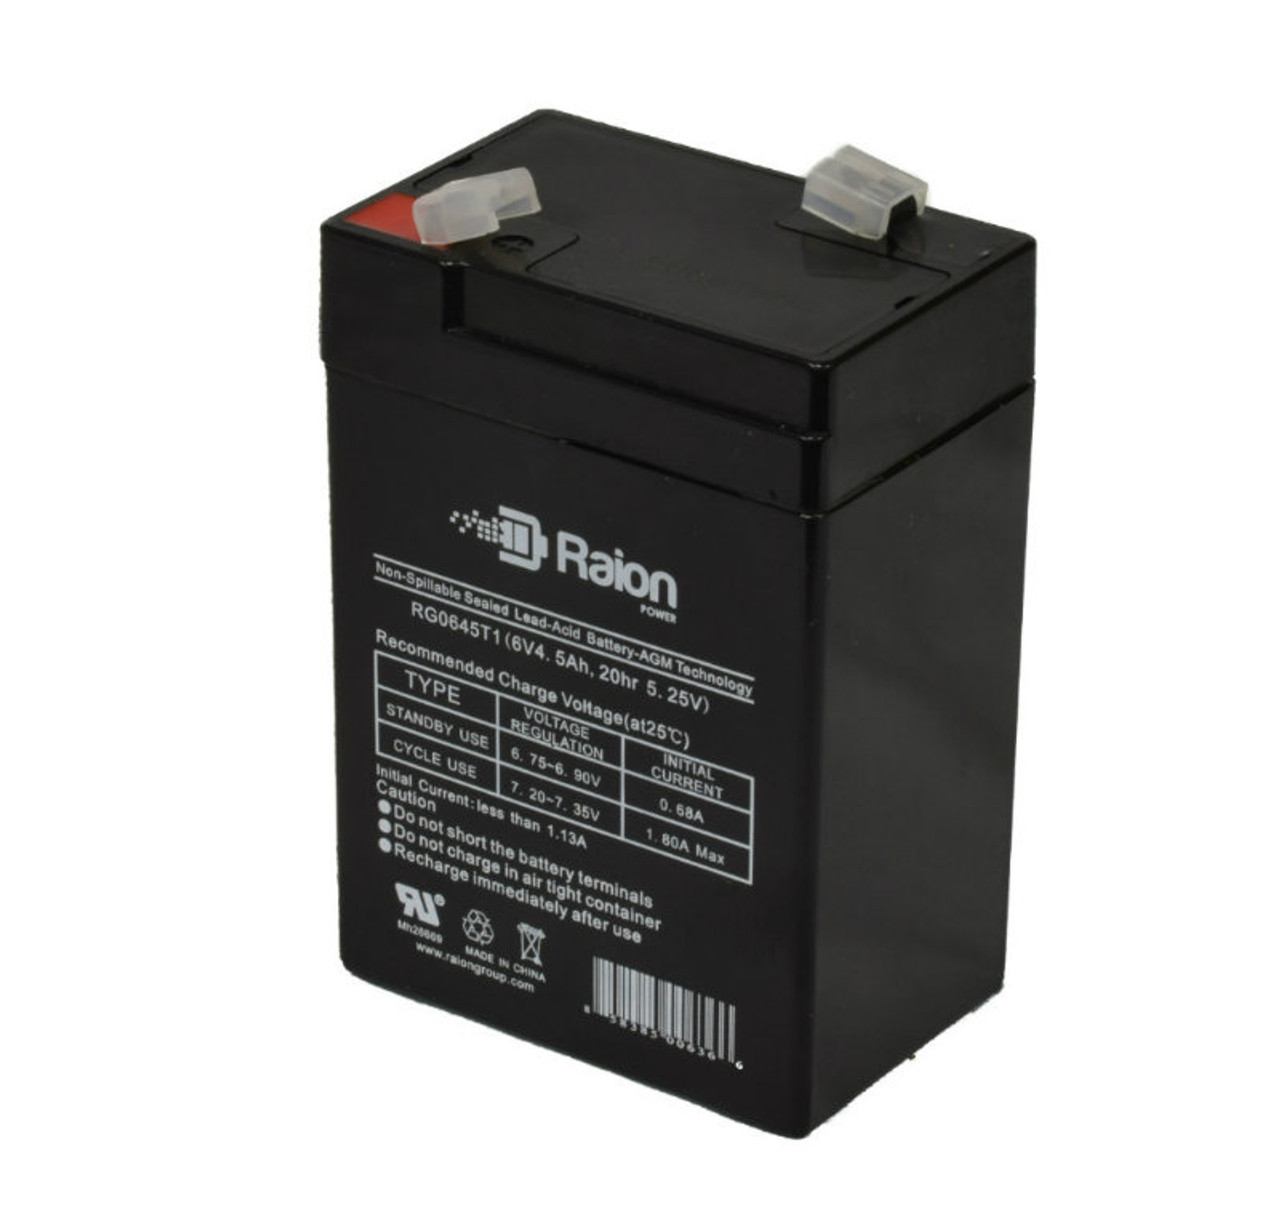 Raion Power RG0645T1 6V 4.5Ah Replacement Battery Cartridge for Ultracell UL5-6